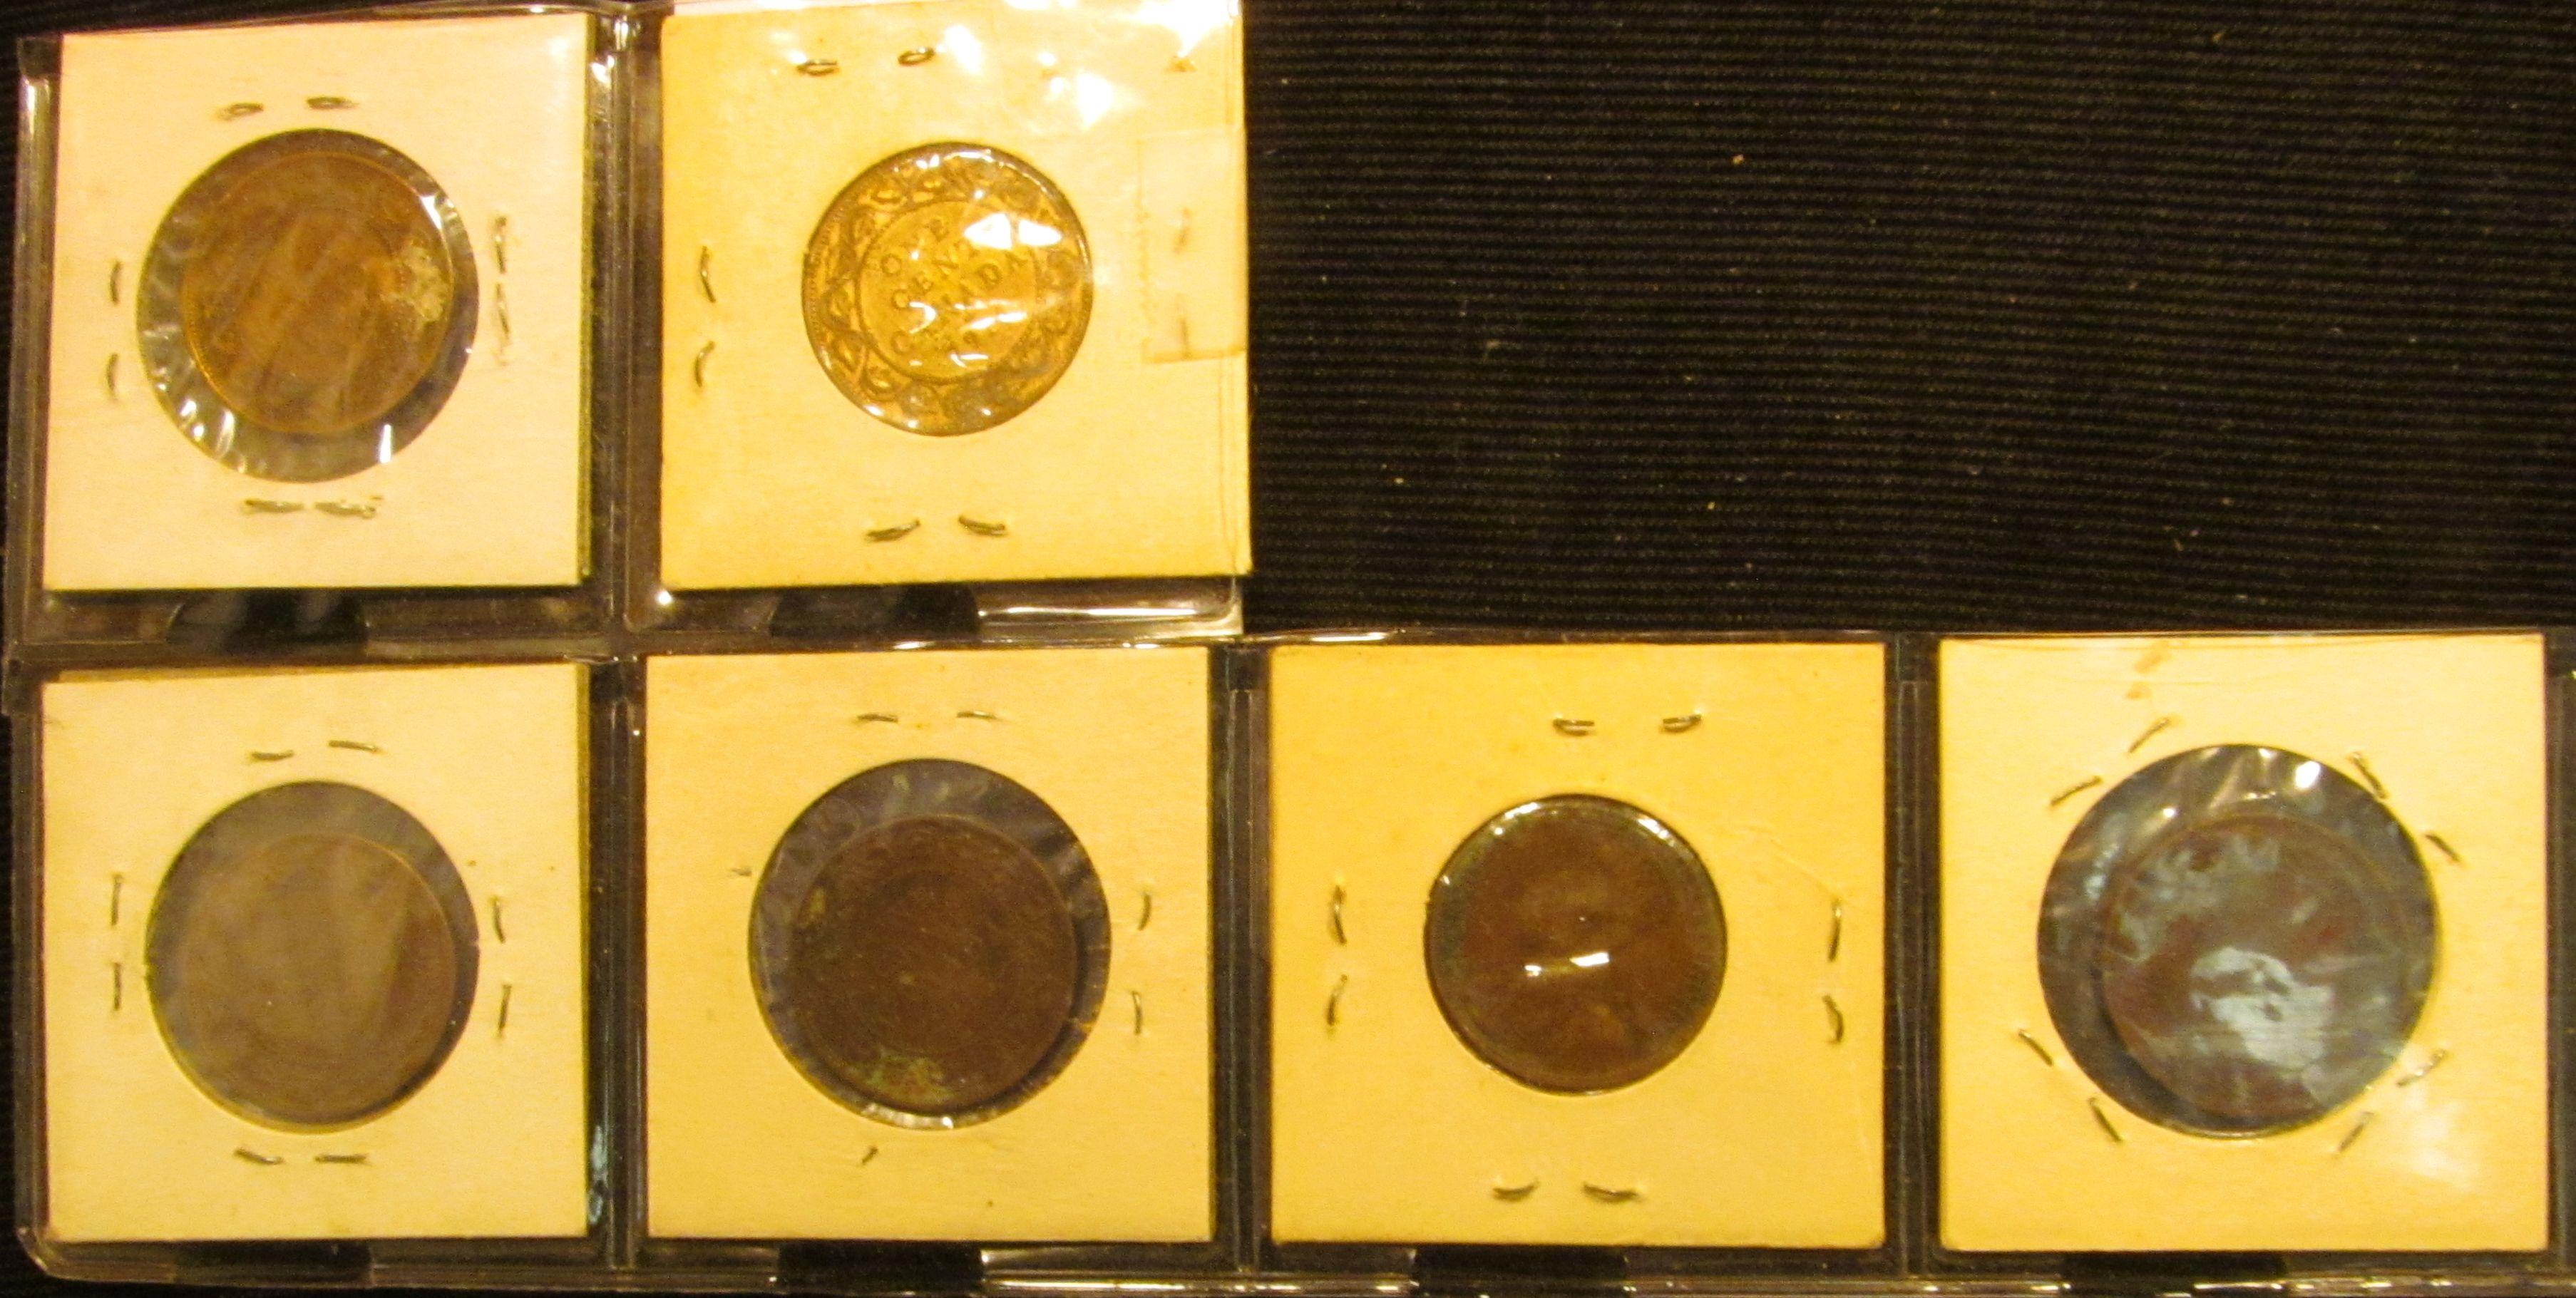 (6) 1916 Canada Large Cents, G-VG with various problems.